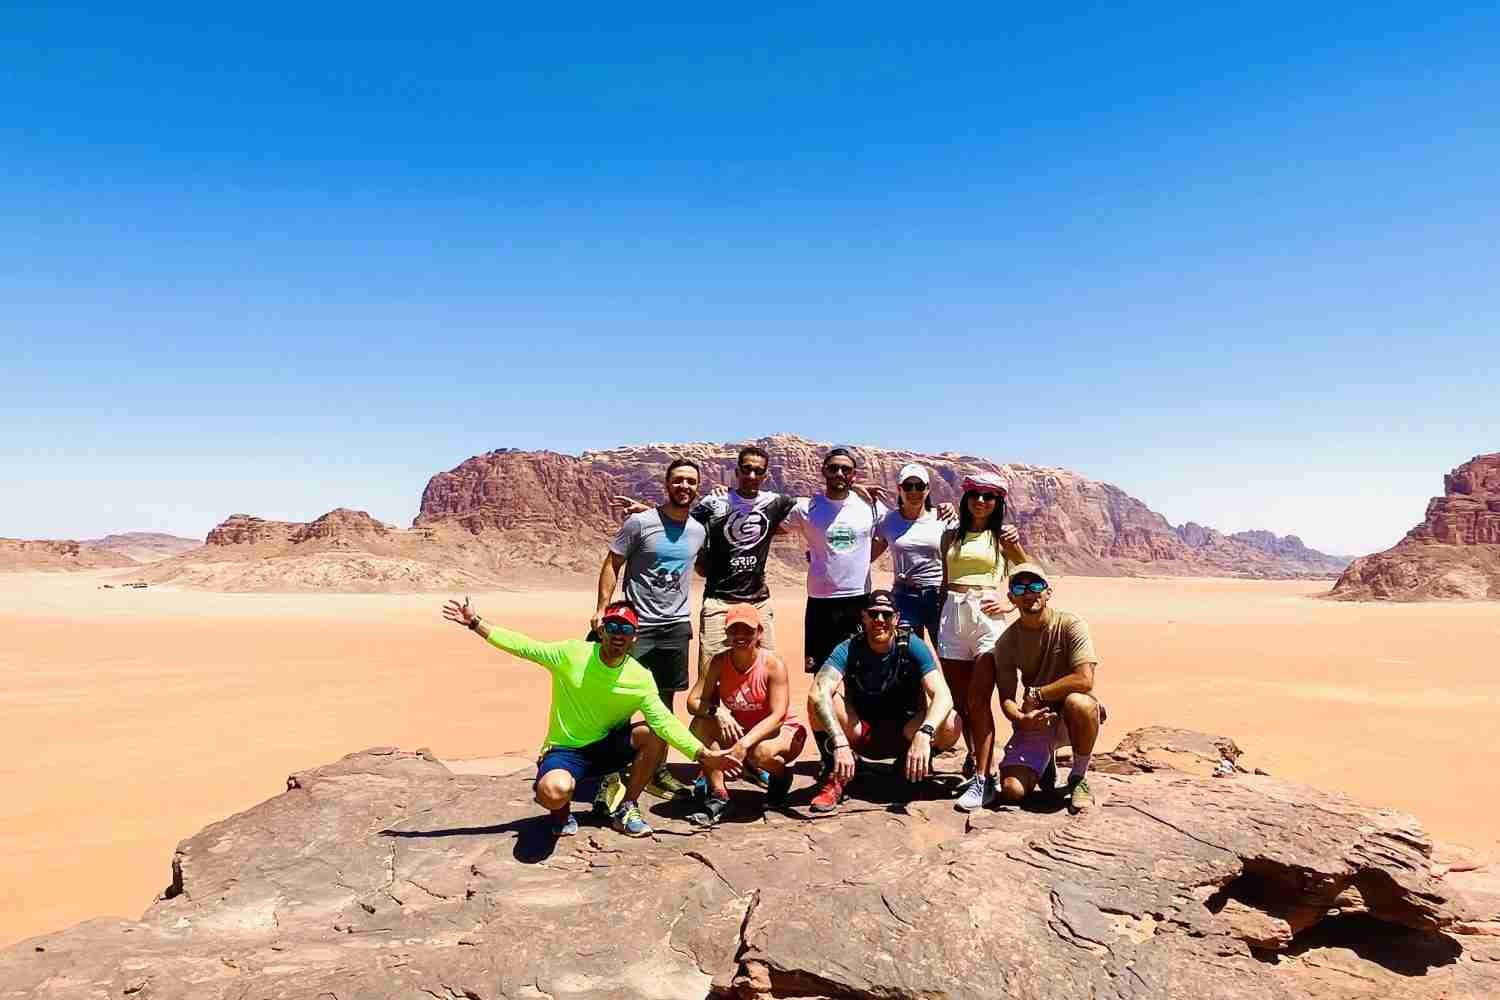 Group of travellers in the desert